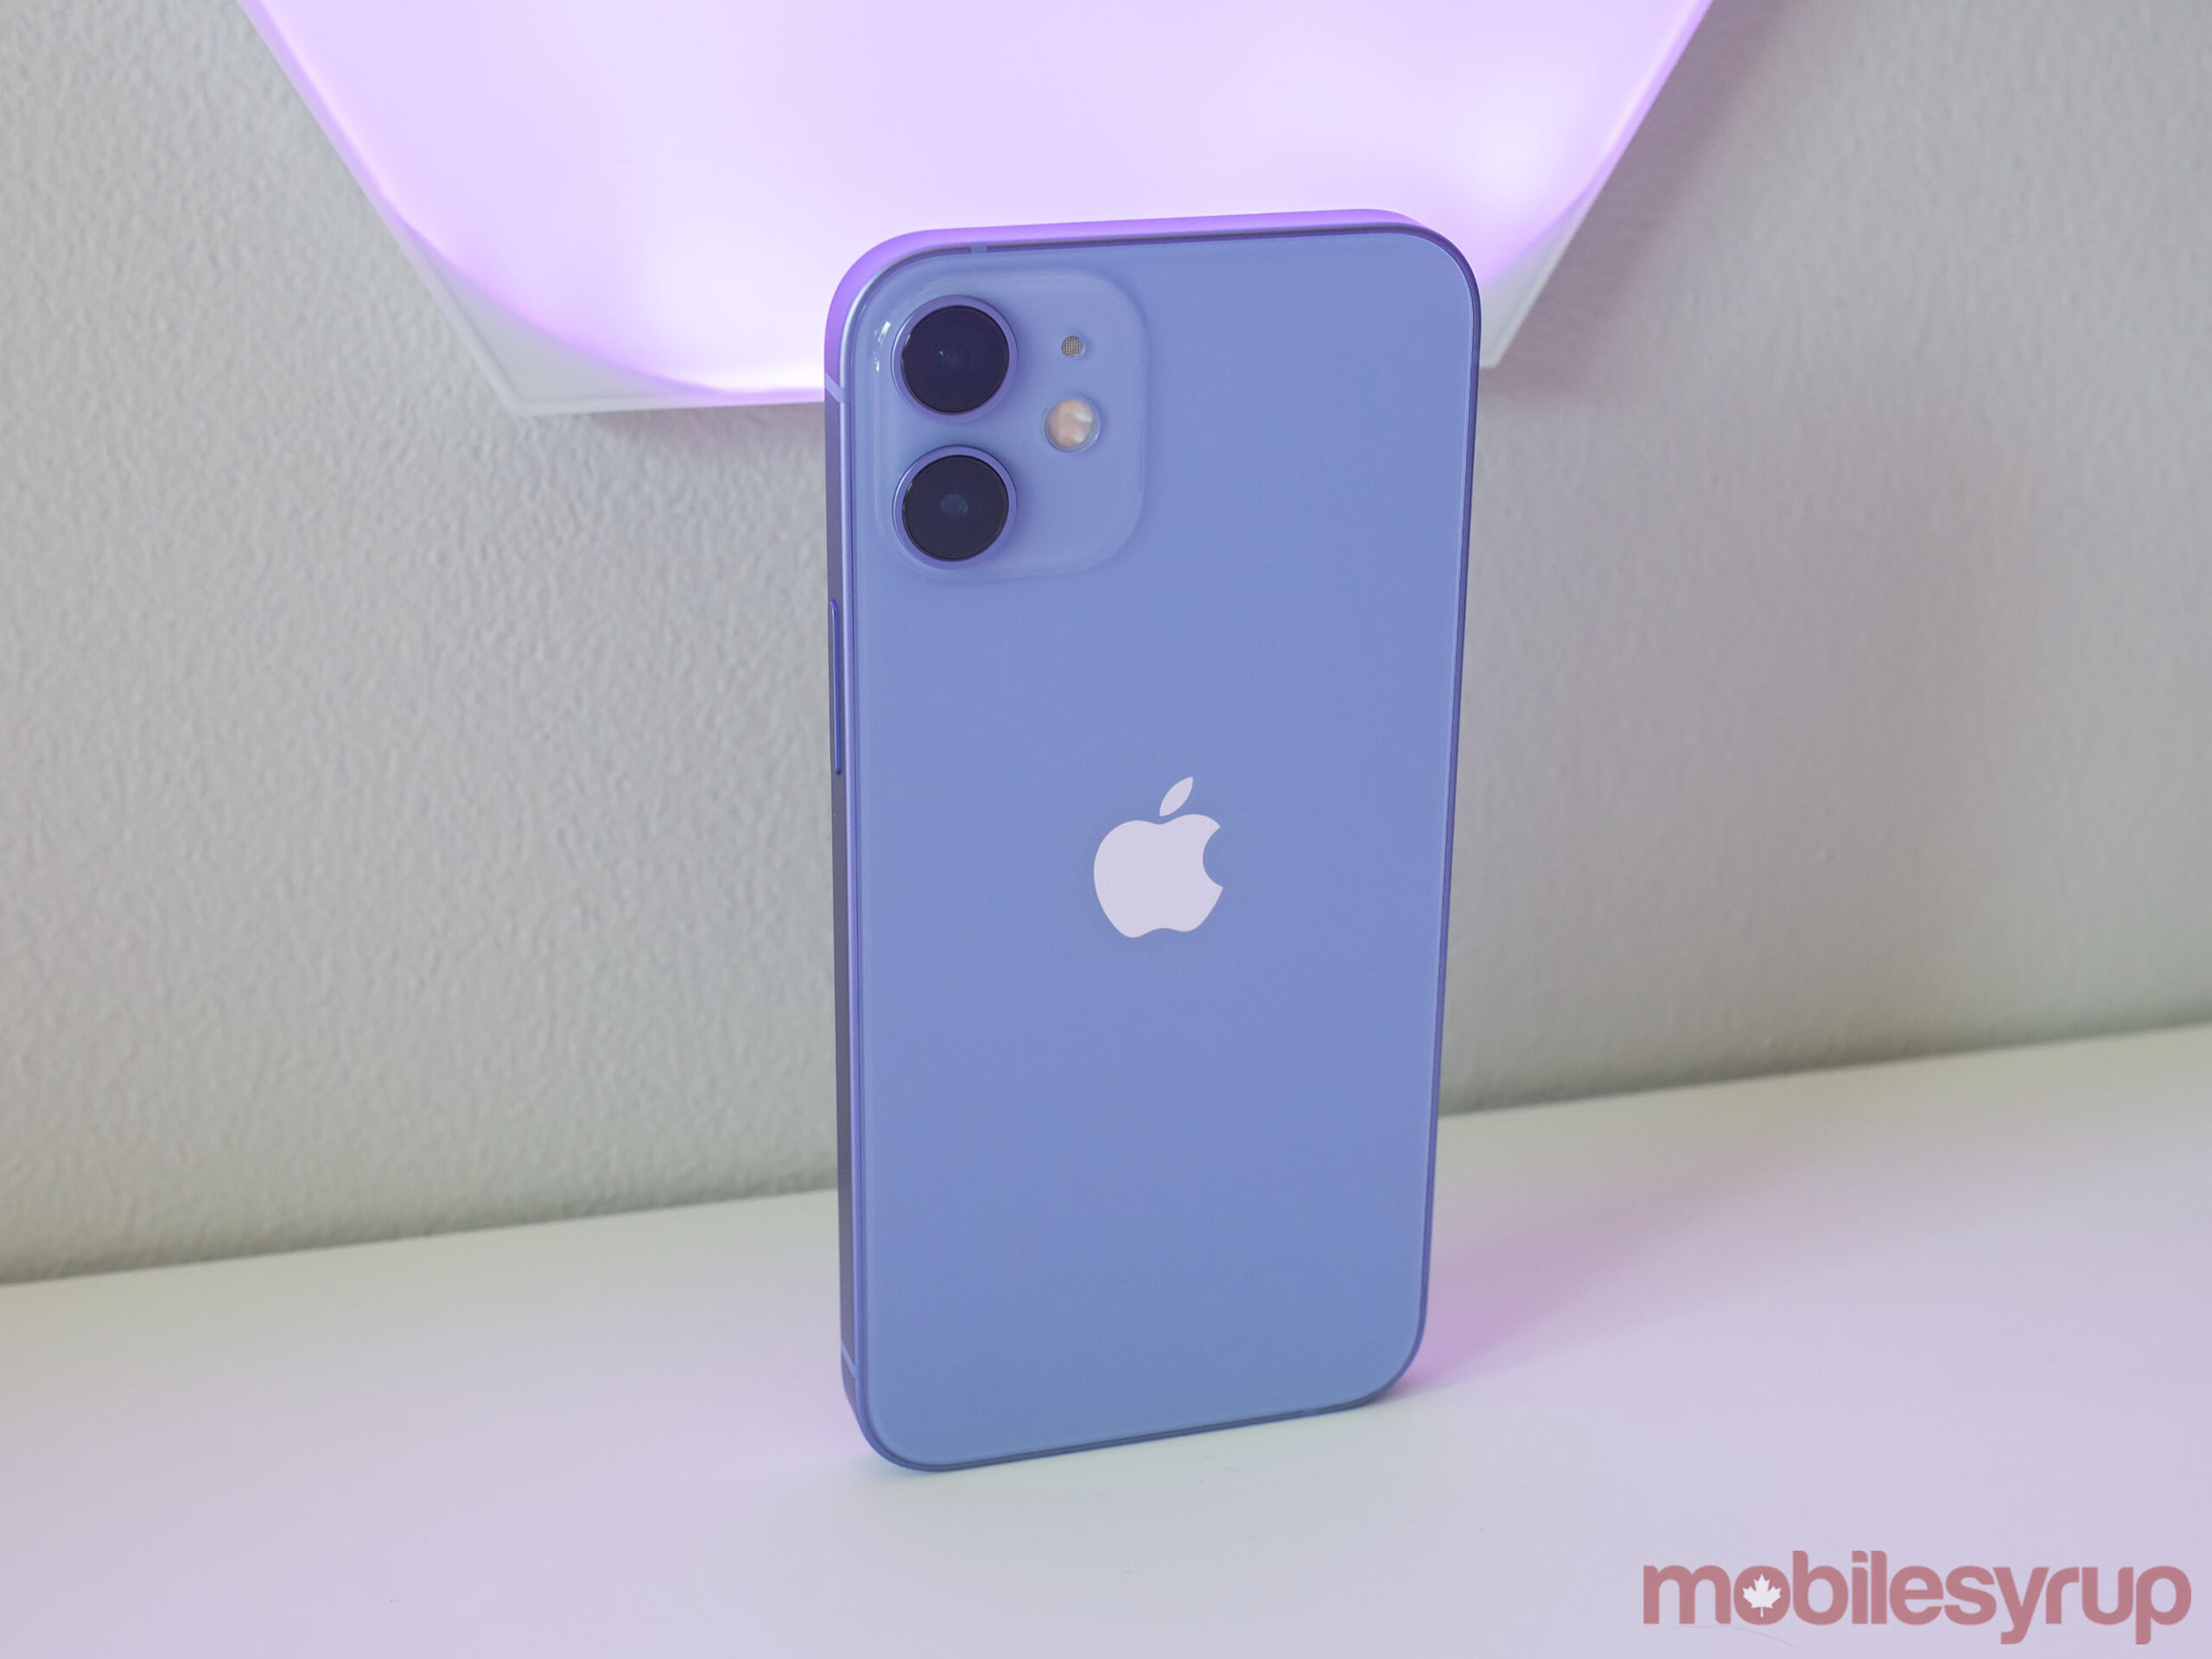 The iPhone 12 mini is an impossibly cute high-end iPhone - MobileSyrup